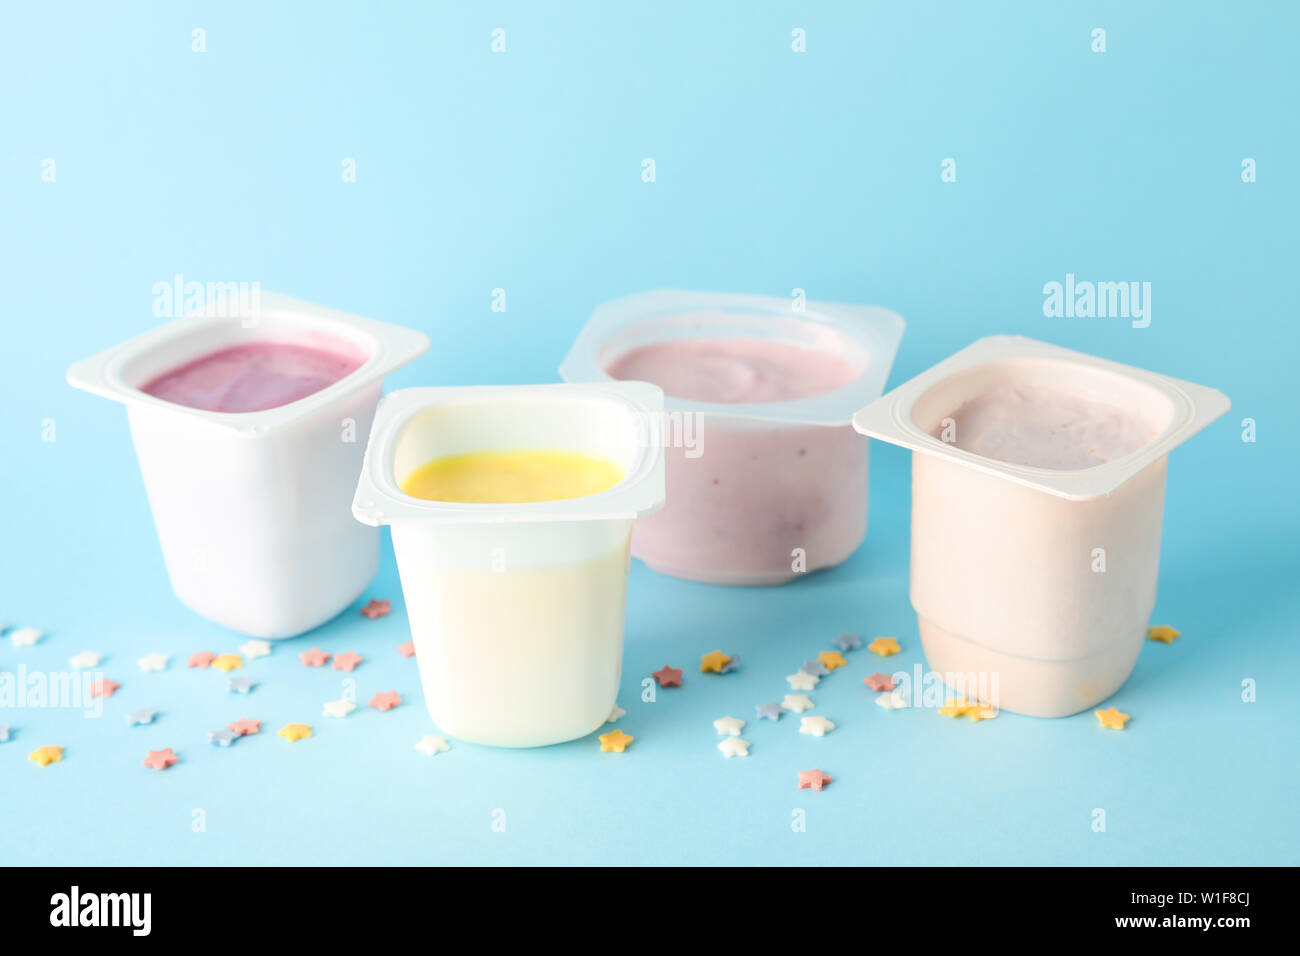 Plastic Cups With Yogurt And Small Stars On Color Background Space For Text Stock Photo Alamy